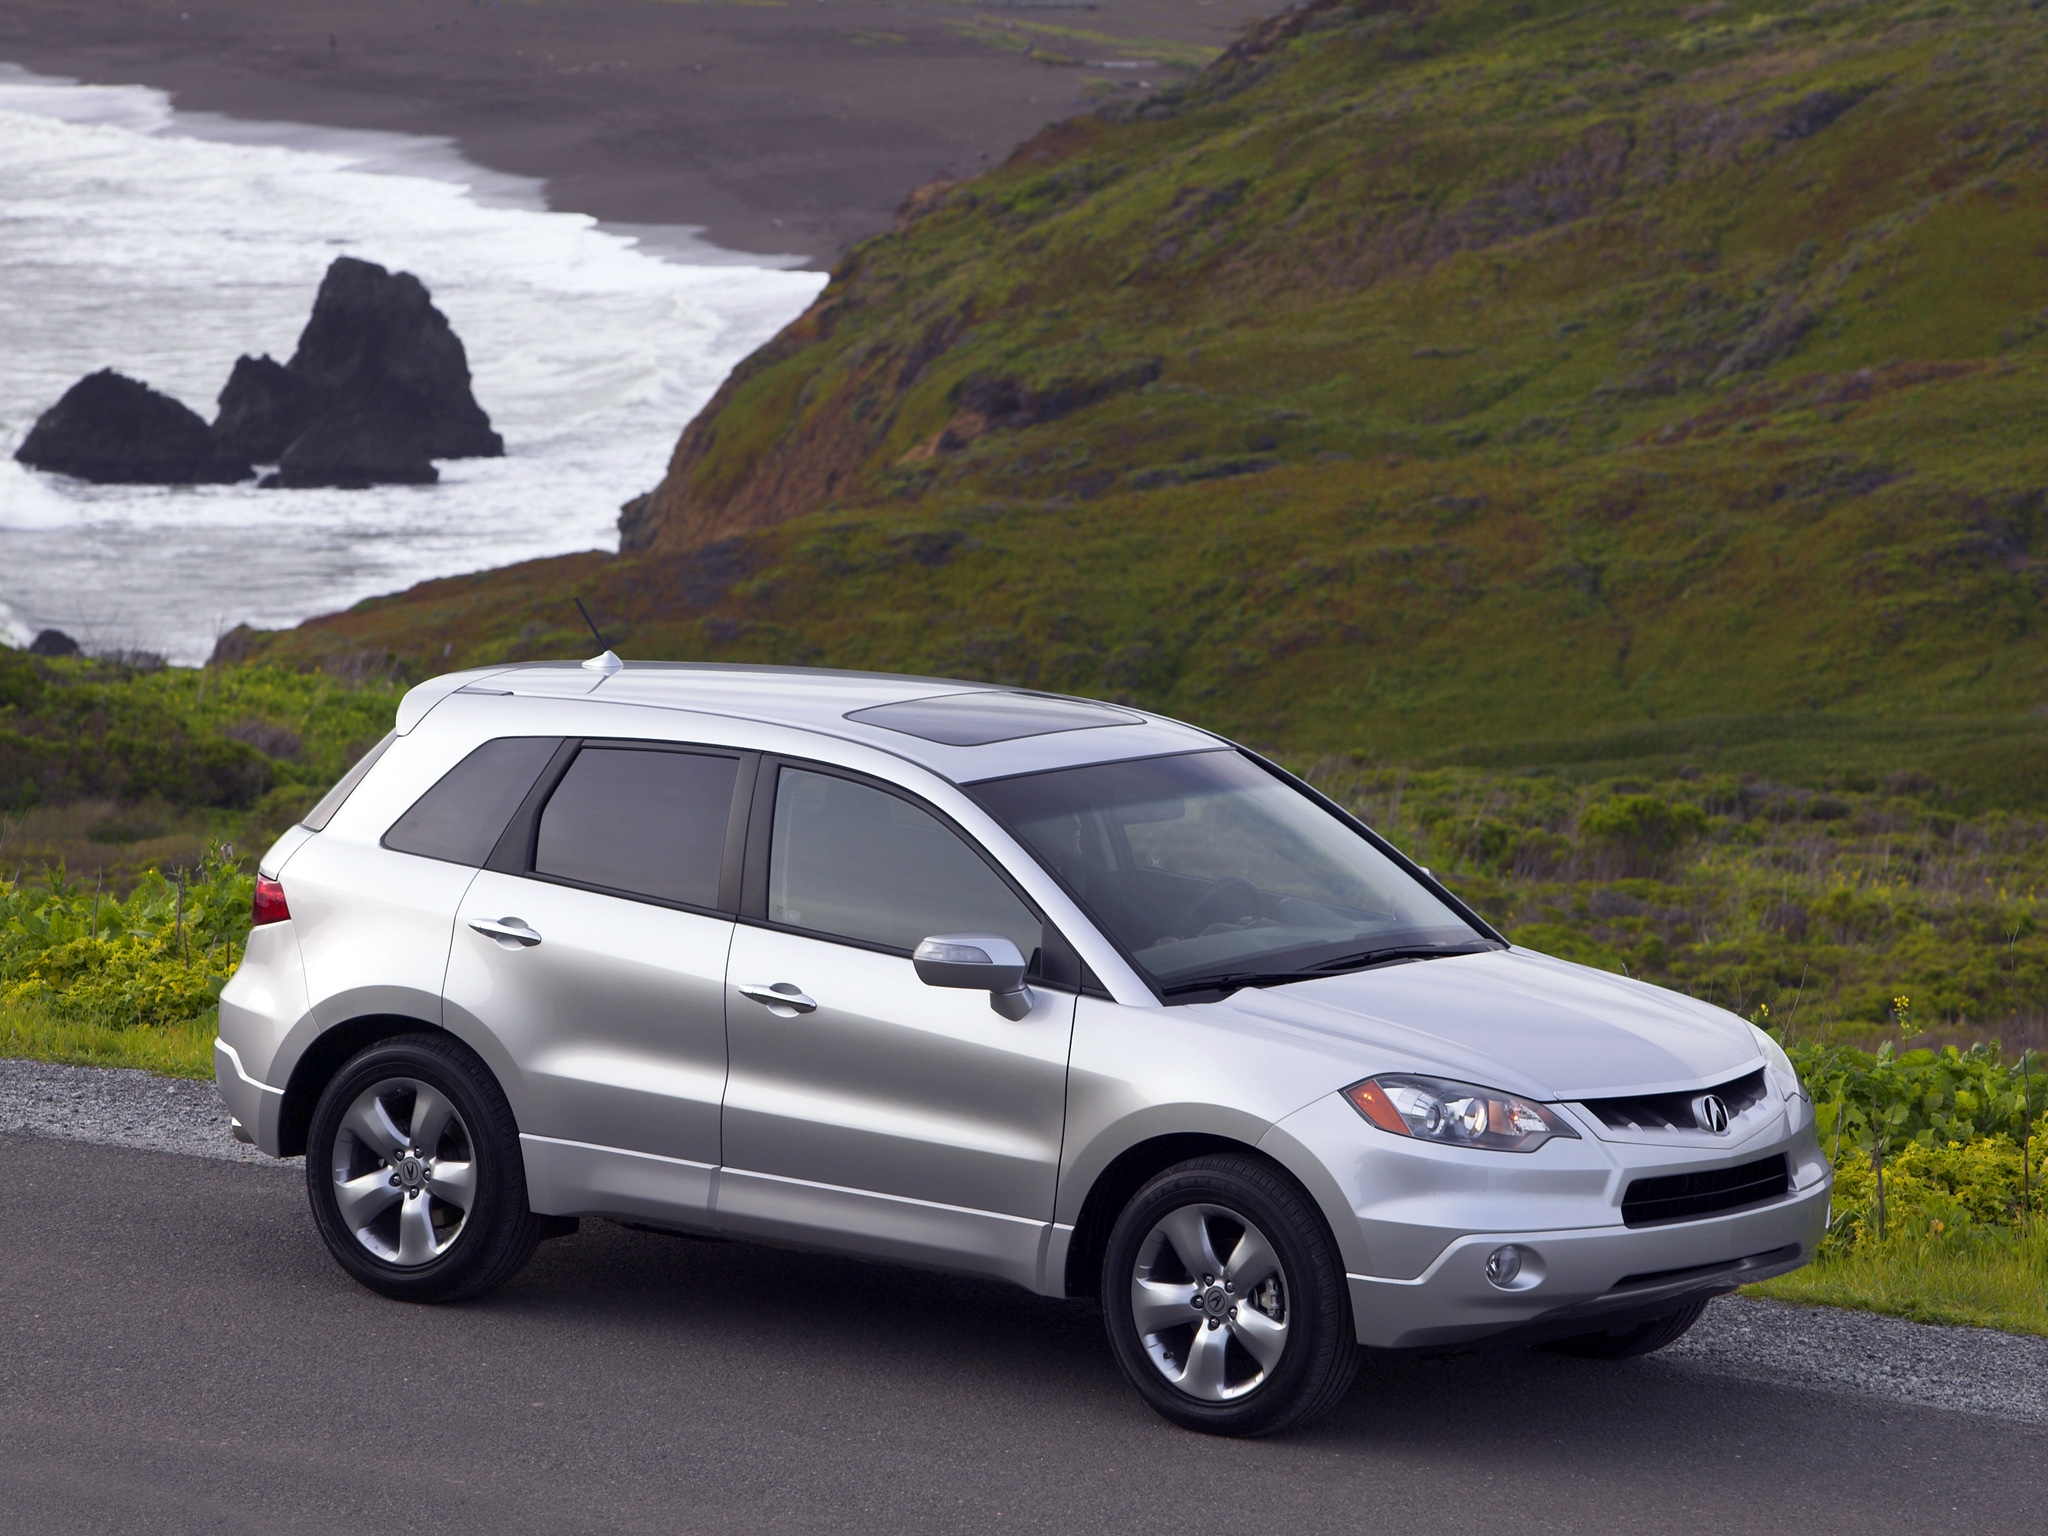 grass, auto, nature, water, acura, cars, view from above, jeep, style, akura, silver metallic, rdx UHD